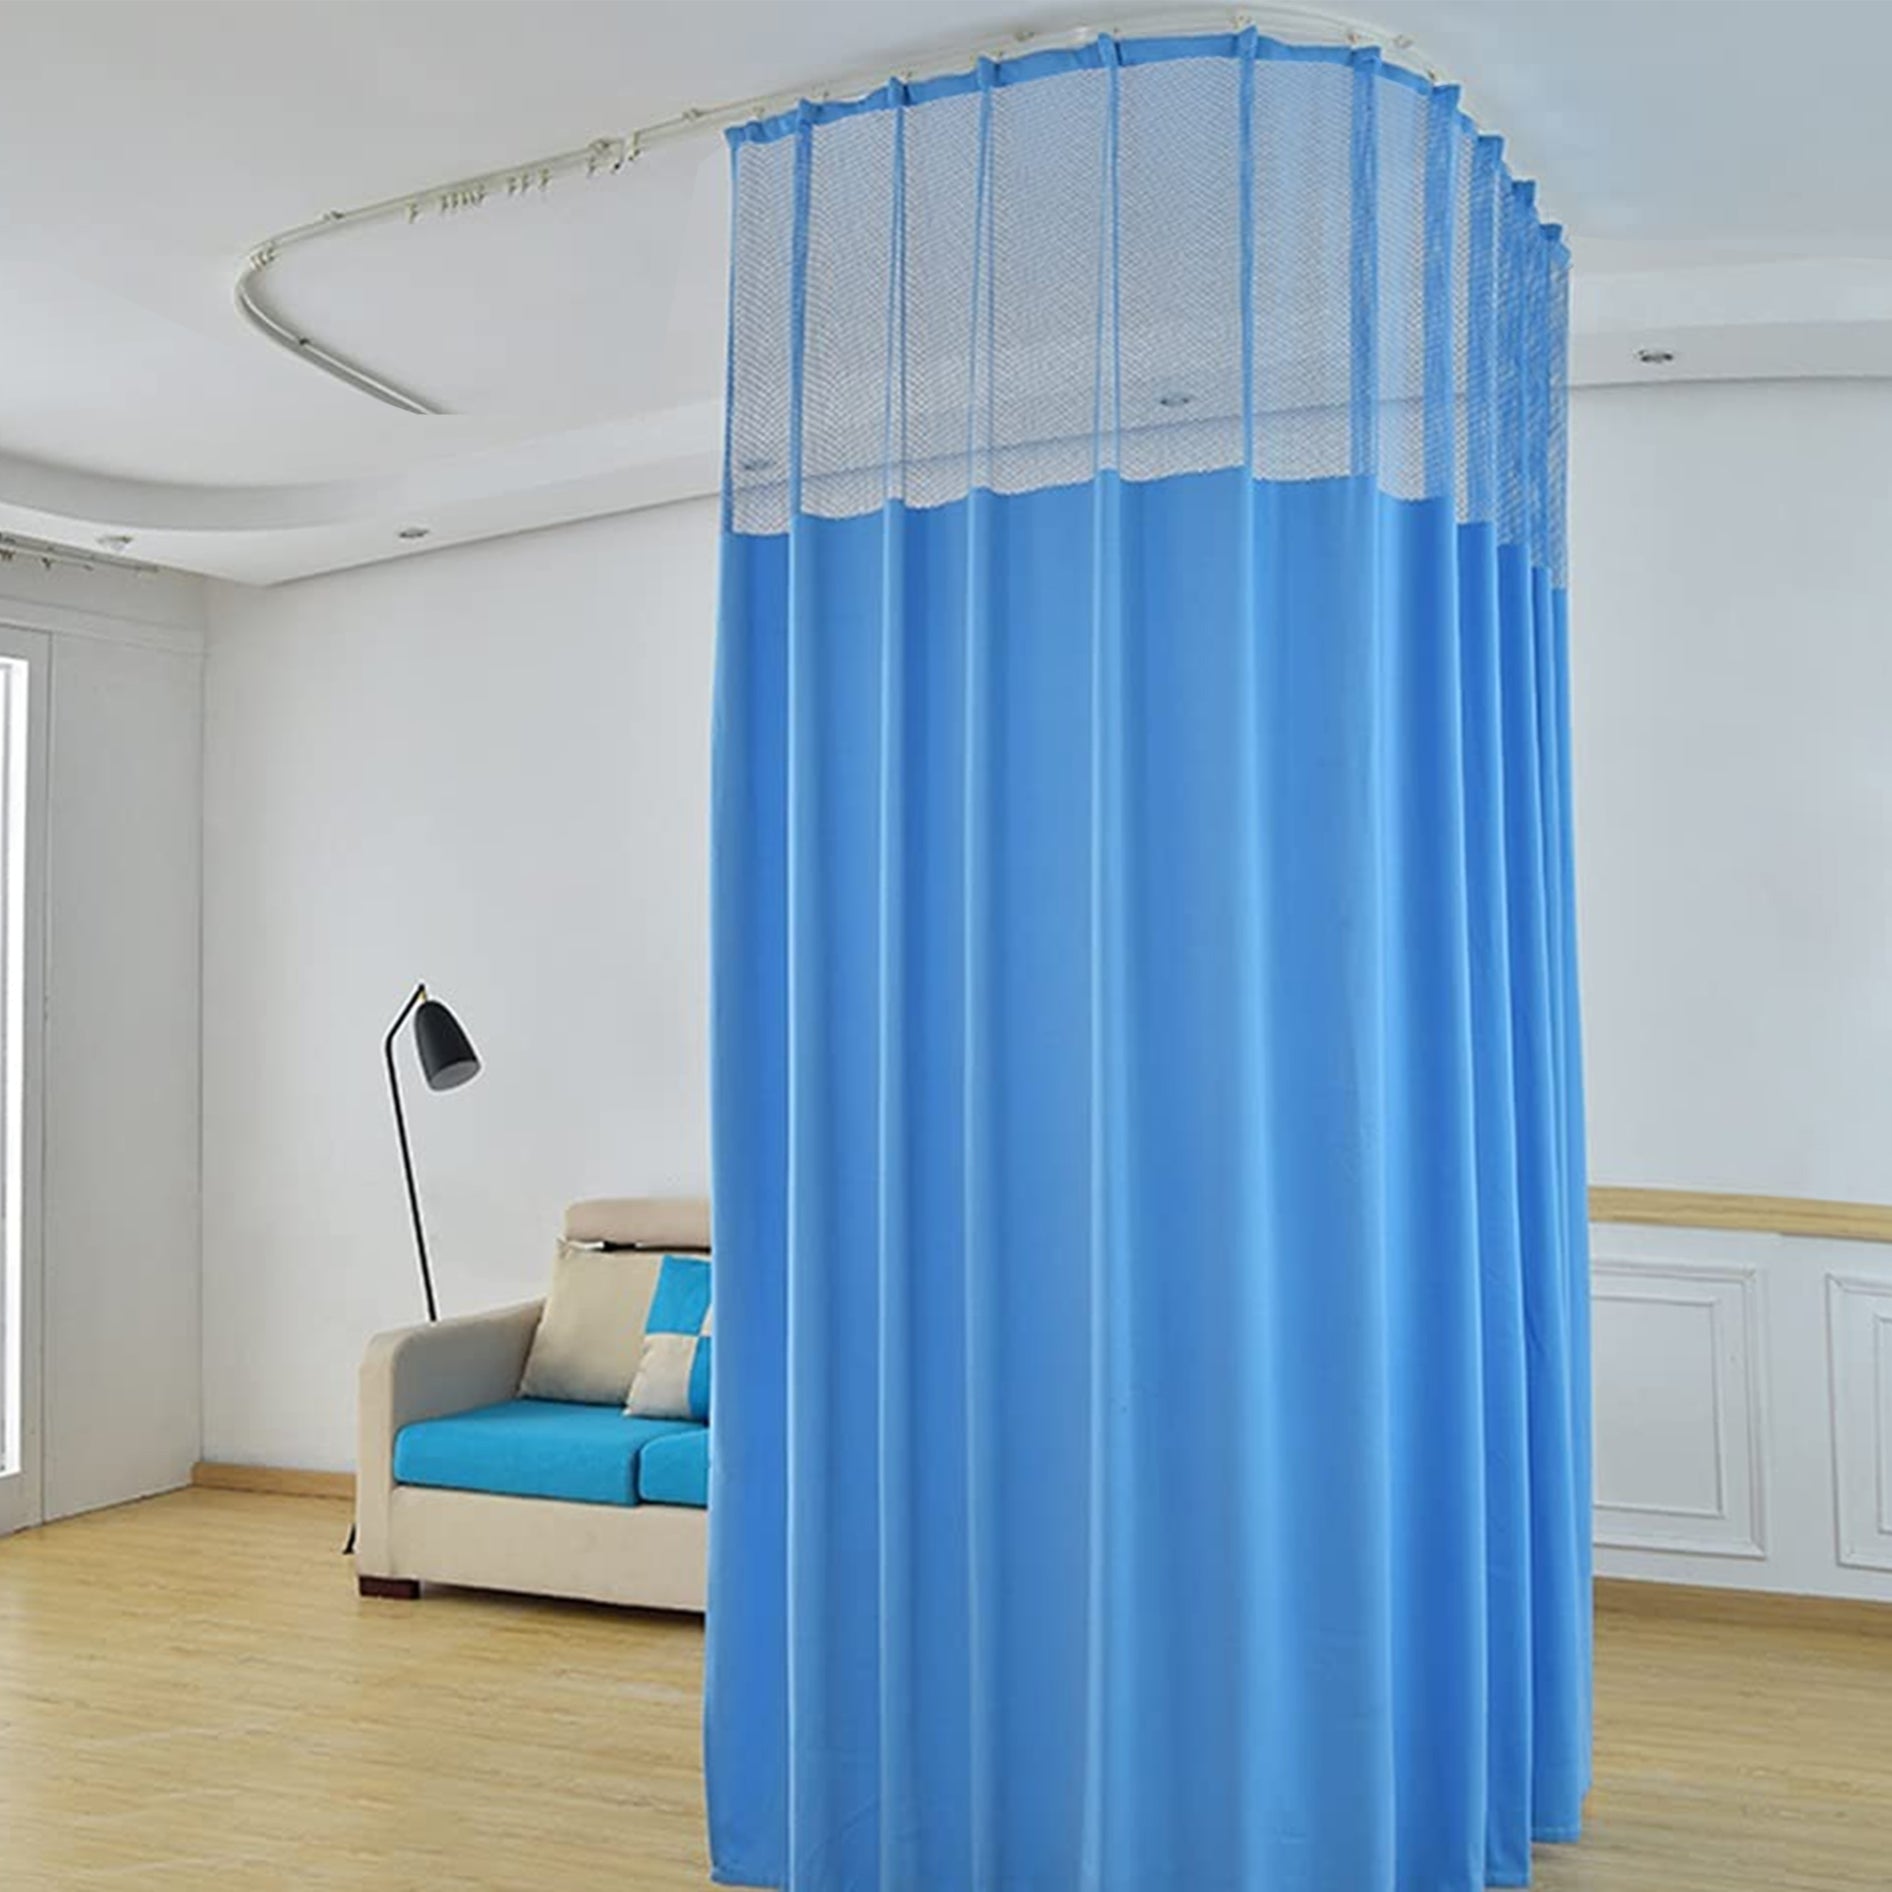 Hospital Partition Curtains, Clinic Curtains Size 4 FT W x 7 ft H, Channel Curtains with Net Fabric, 100% polyester 8 Rustfree Metal Eyelets 8 Plastic Hook, Medical Blue, (4x7 FT, Pk of 1)